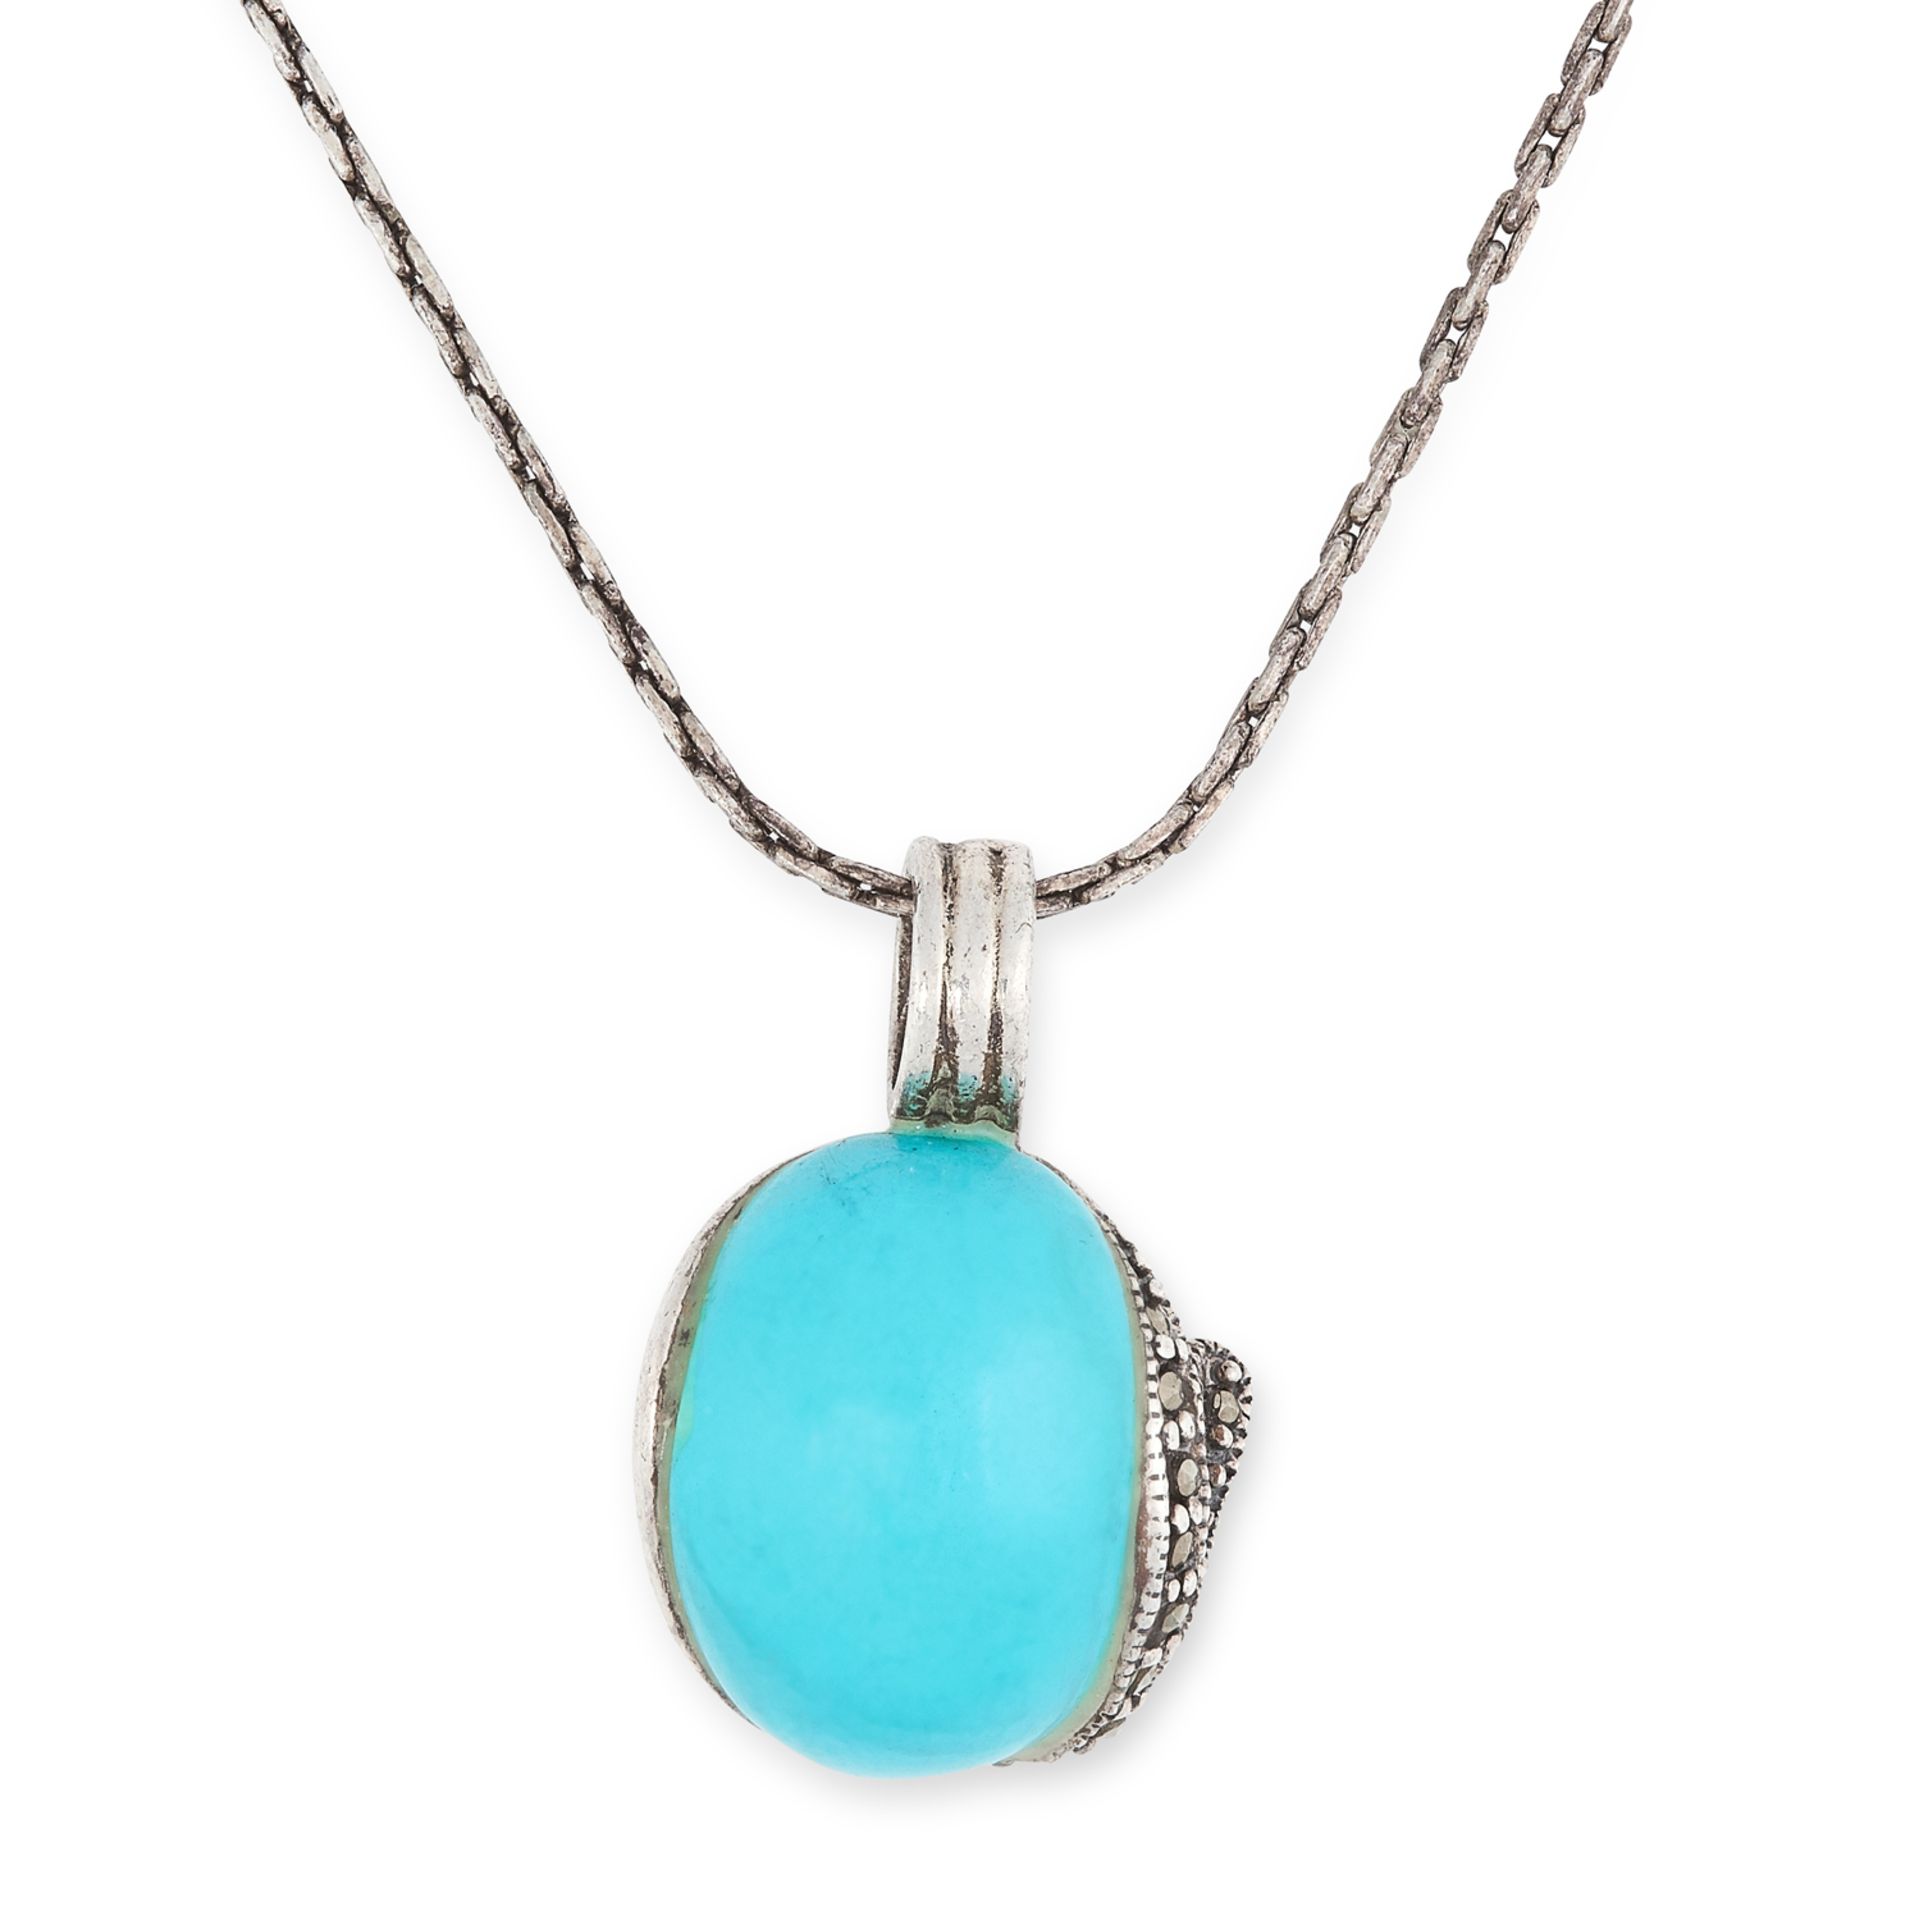 TURQUOISE AND MARCASITE PENDANT set with a cabochon turquoise in a border set with round cut